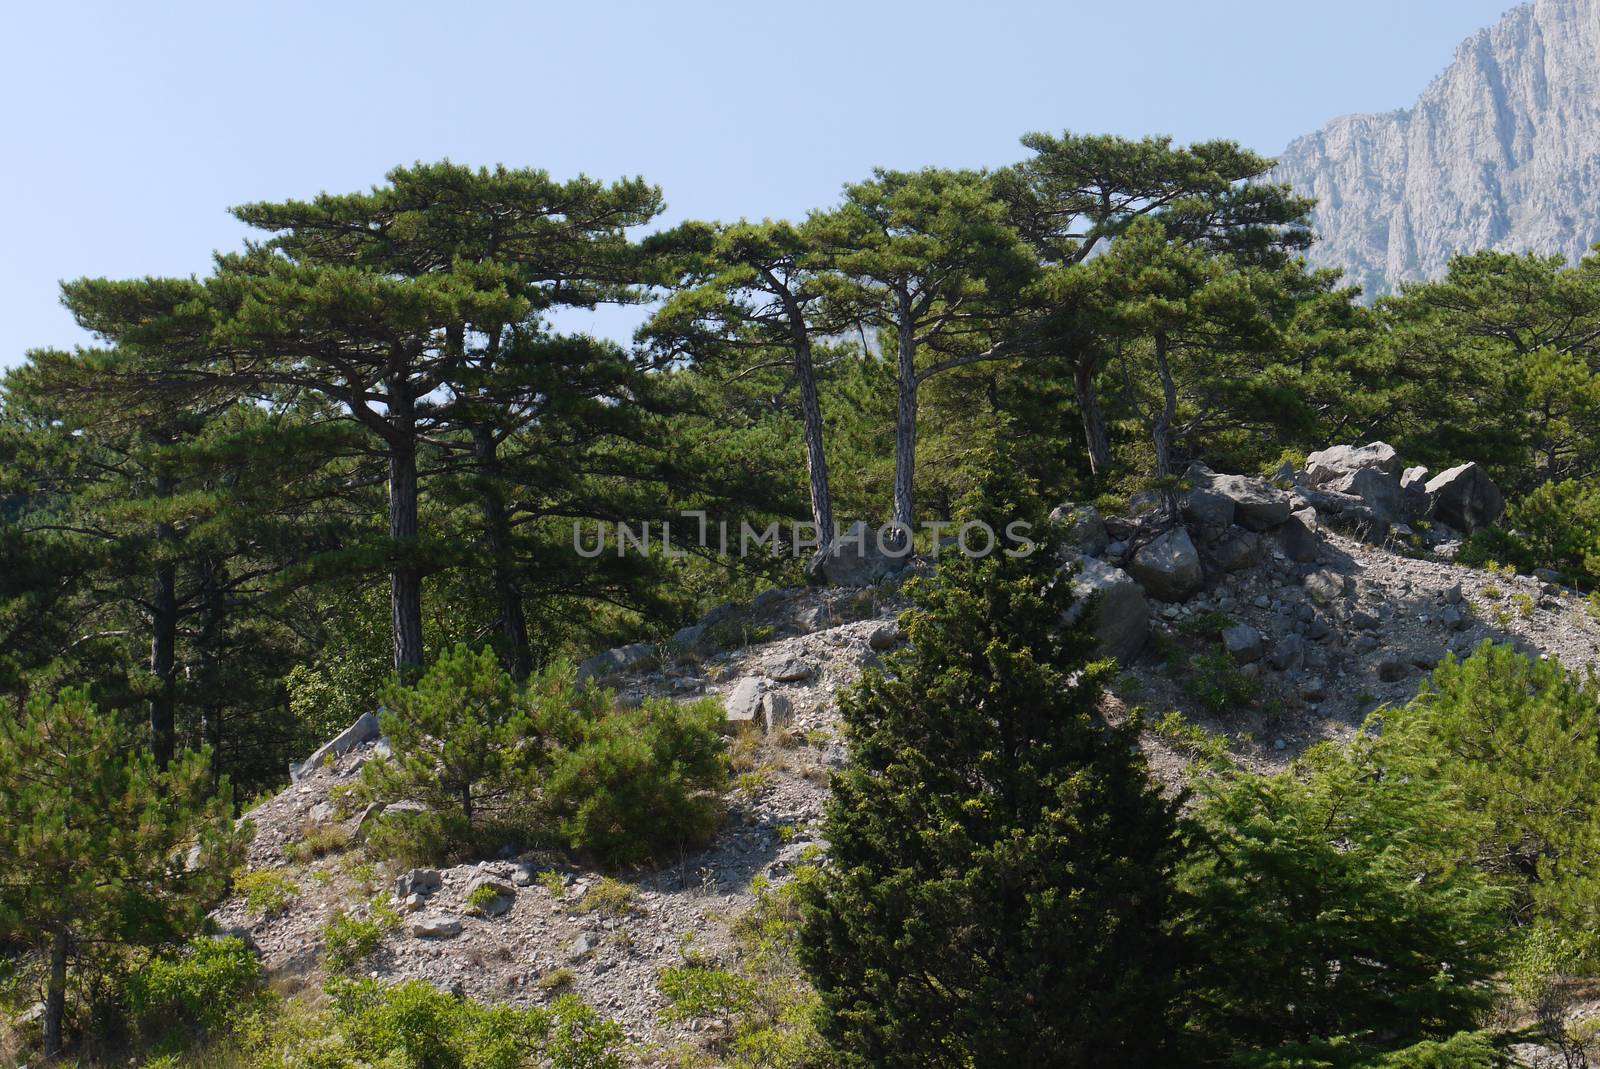 high green trees under a blue sky against the background of high rocks